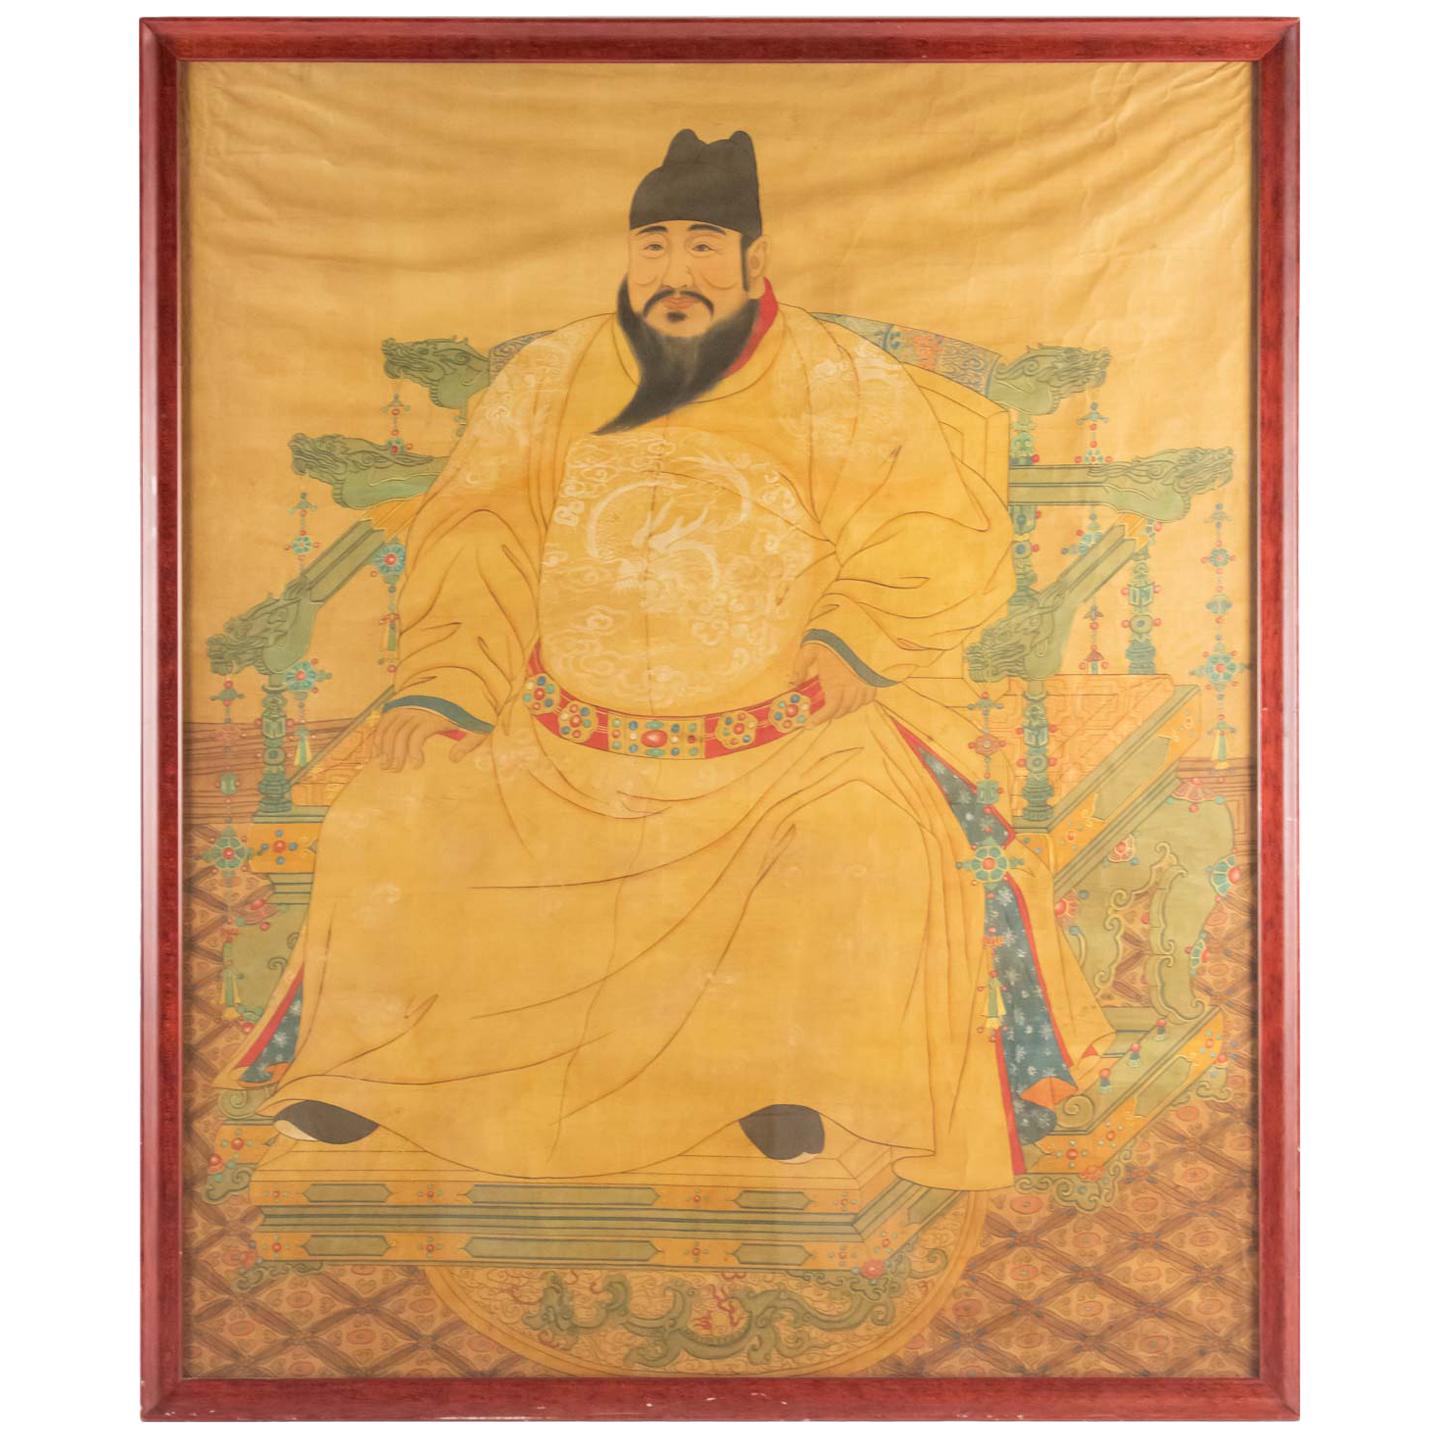 Portrait of Emperor Yongle on His Throne, Painting on Fabric, Early 20th Century